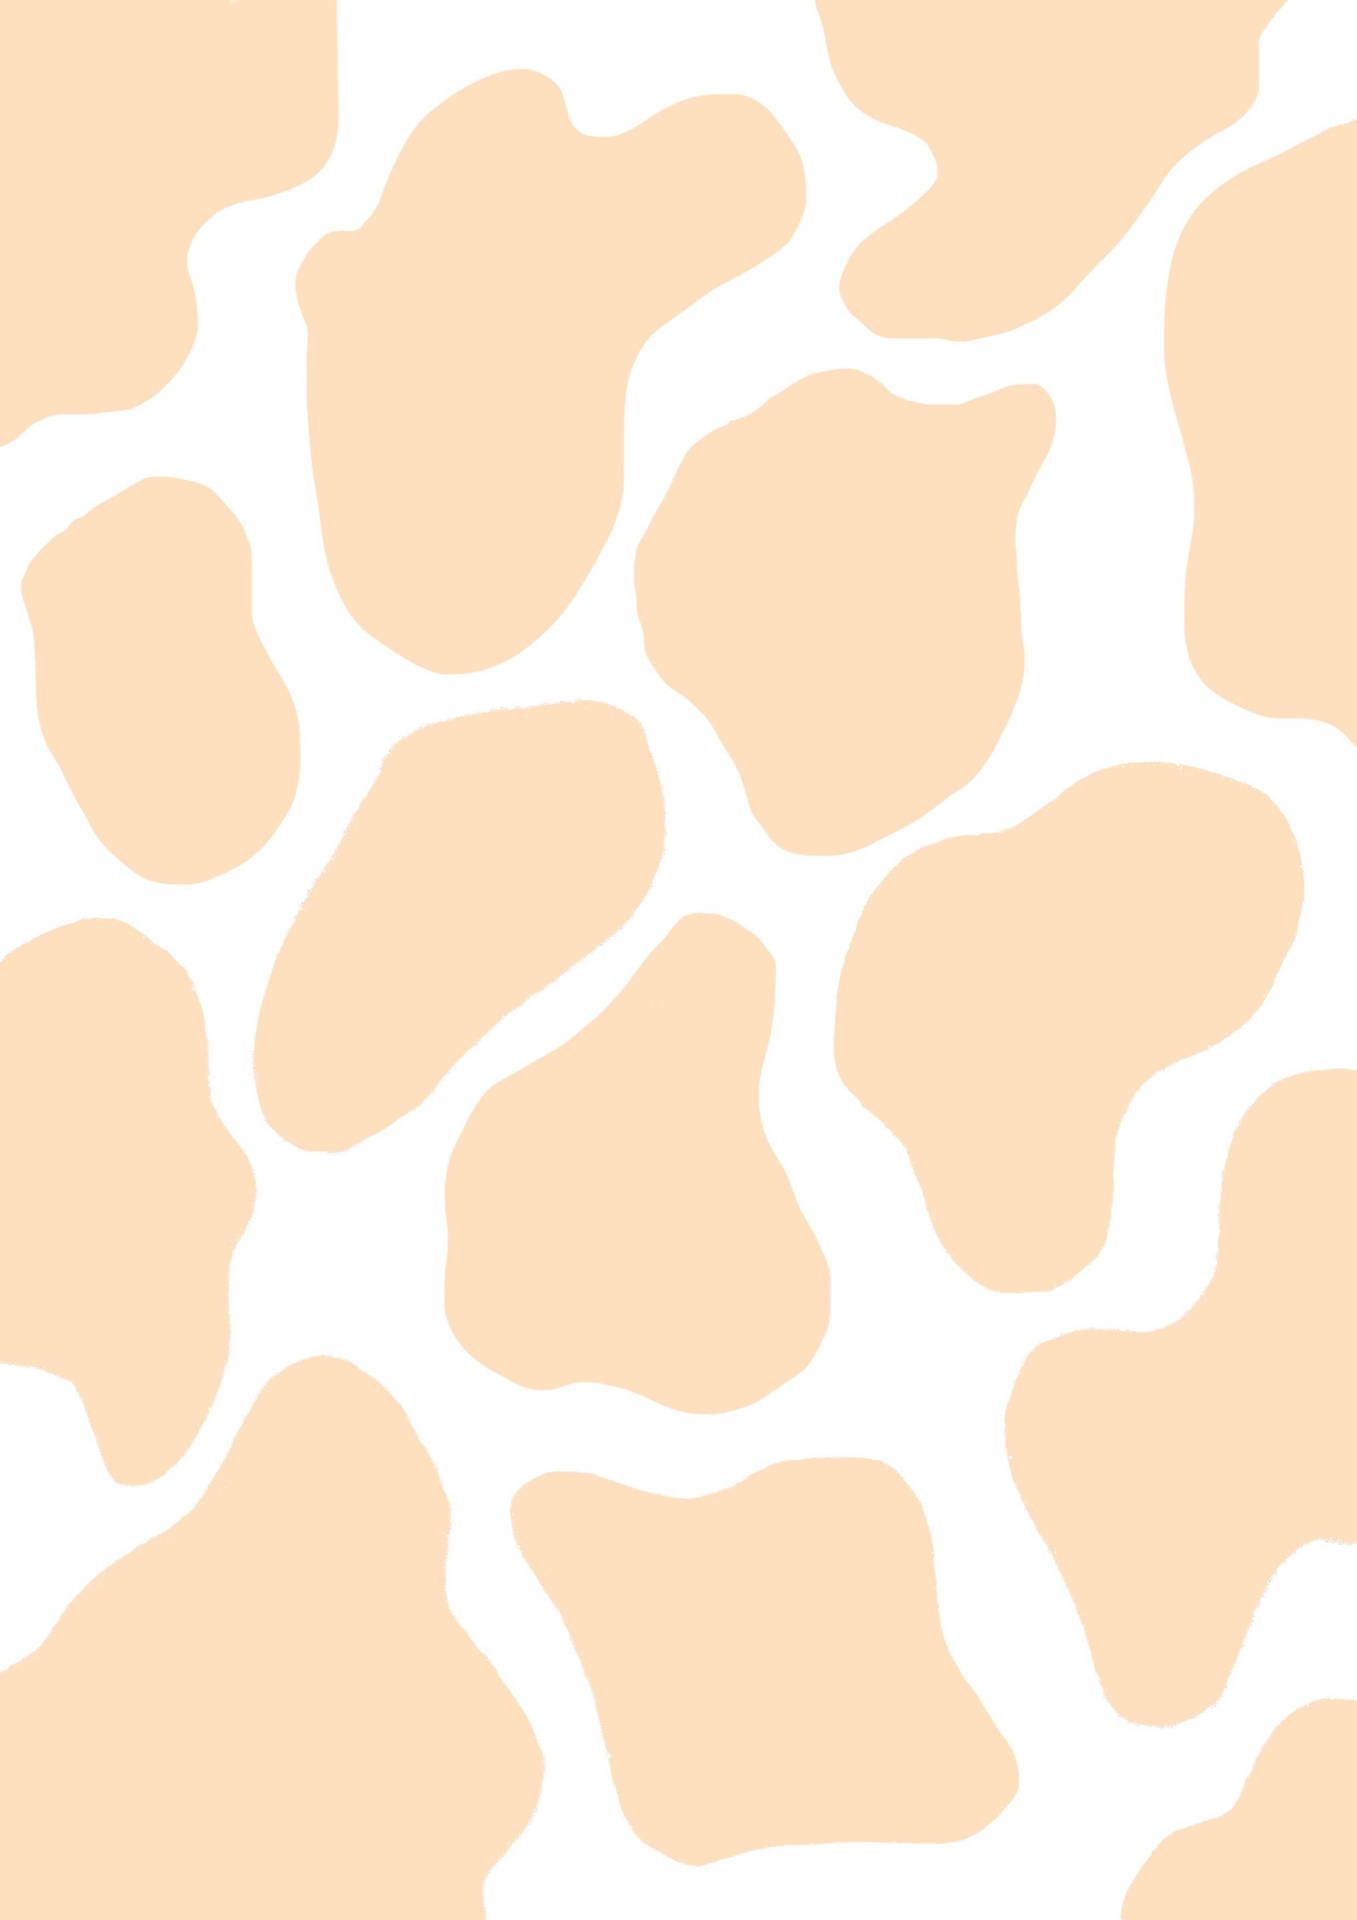 A pattern of brown and white spots - Cow